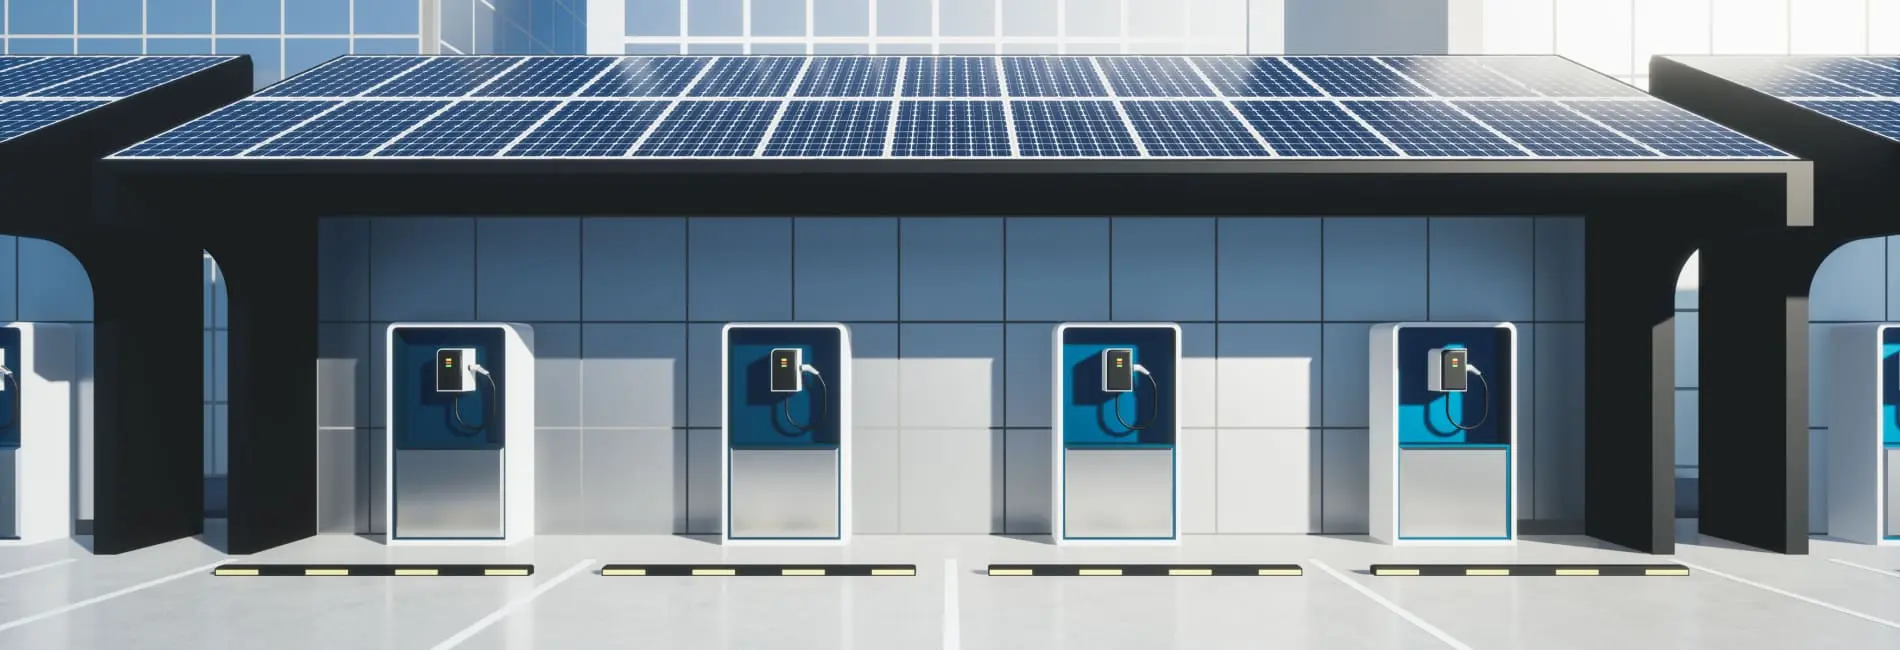 Innovative Approaches to EV Charging Station Architecture and User Experience